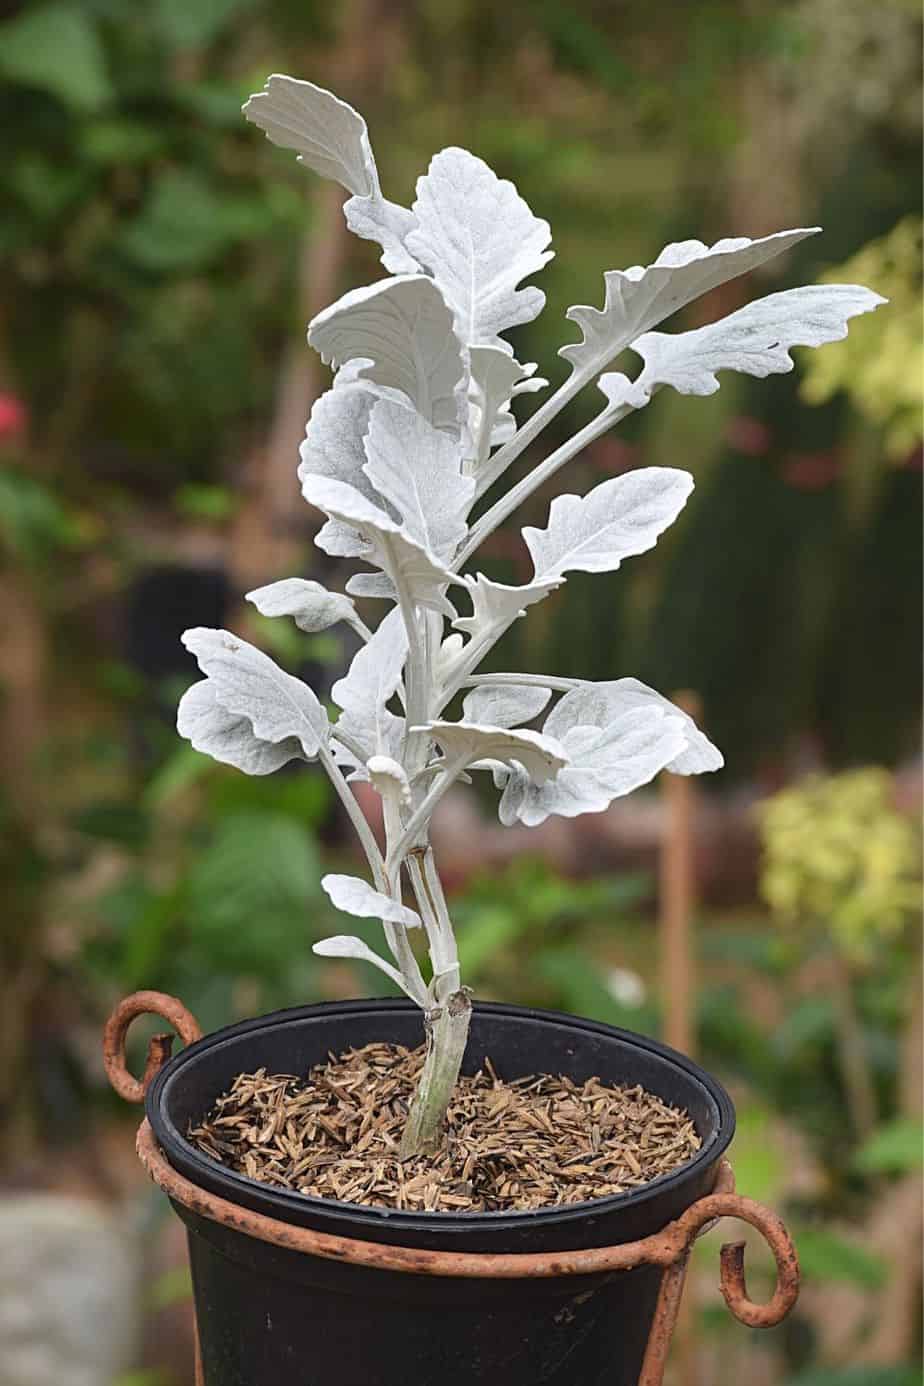 The Dusty miller's gray lacy foliage is sure to wow anyone who passes by the west-facing side of your house